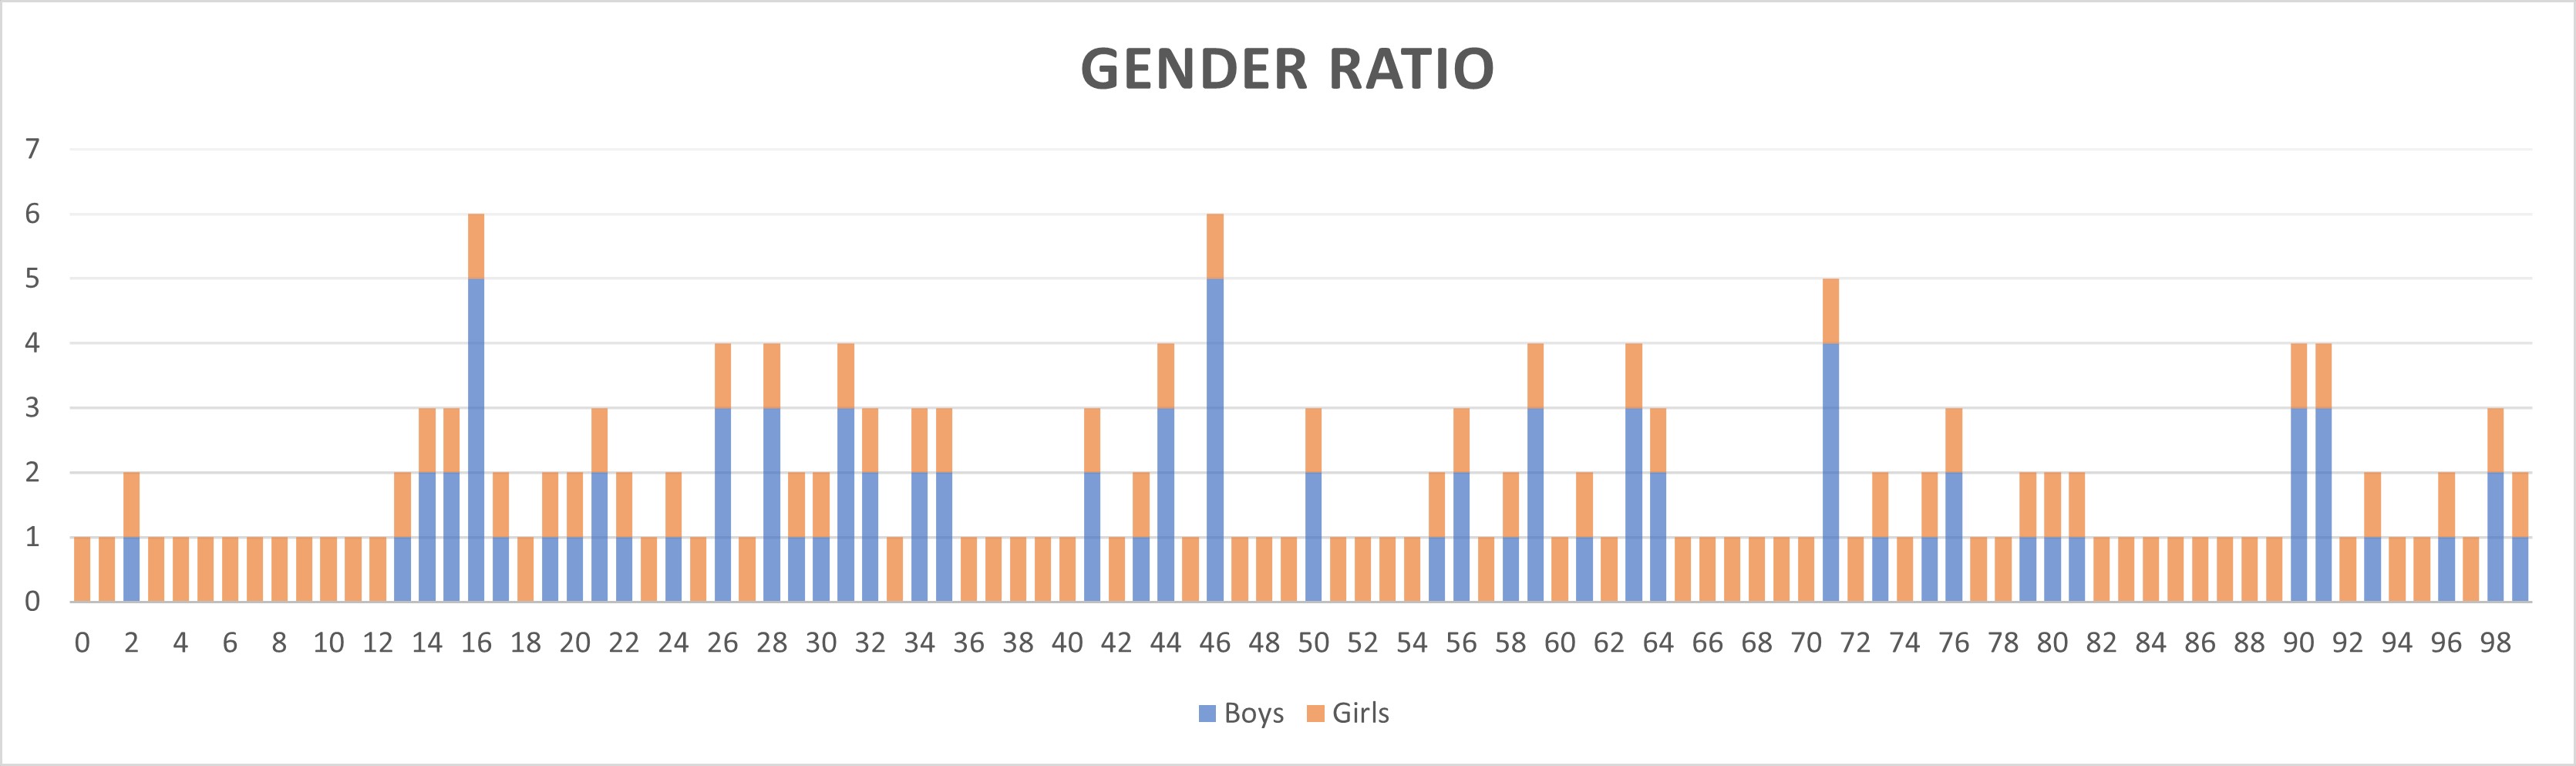 Balancing Gender Ratios: A Mathematical Approach to Maintain Equality